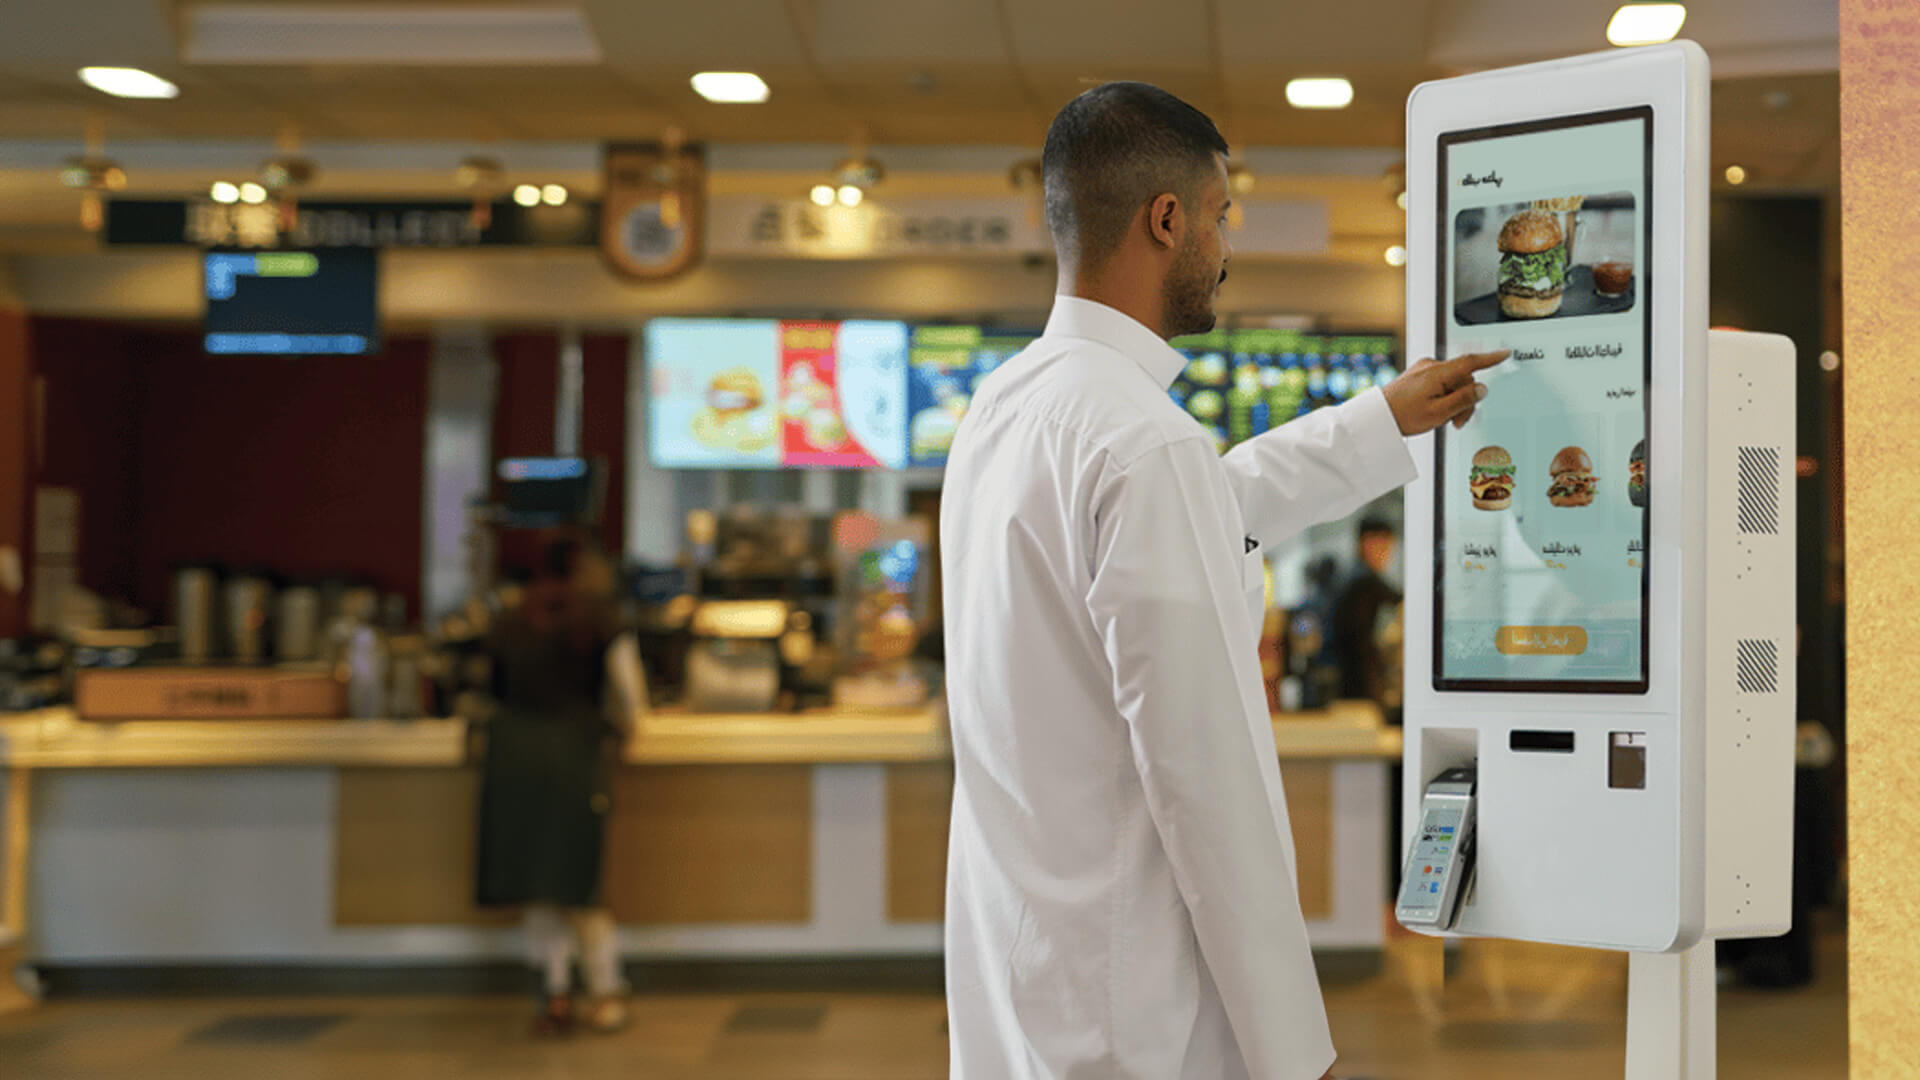 Real-time menu updates with fast food signage in restaurant chains.